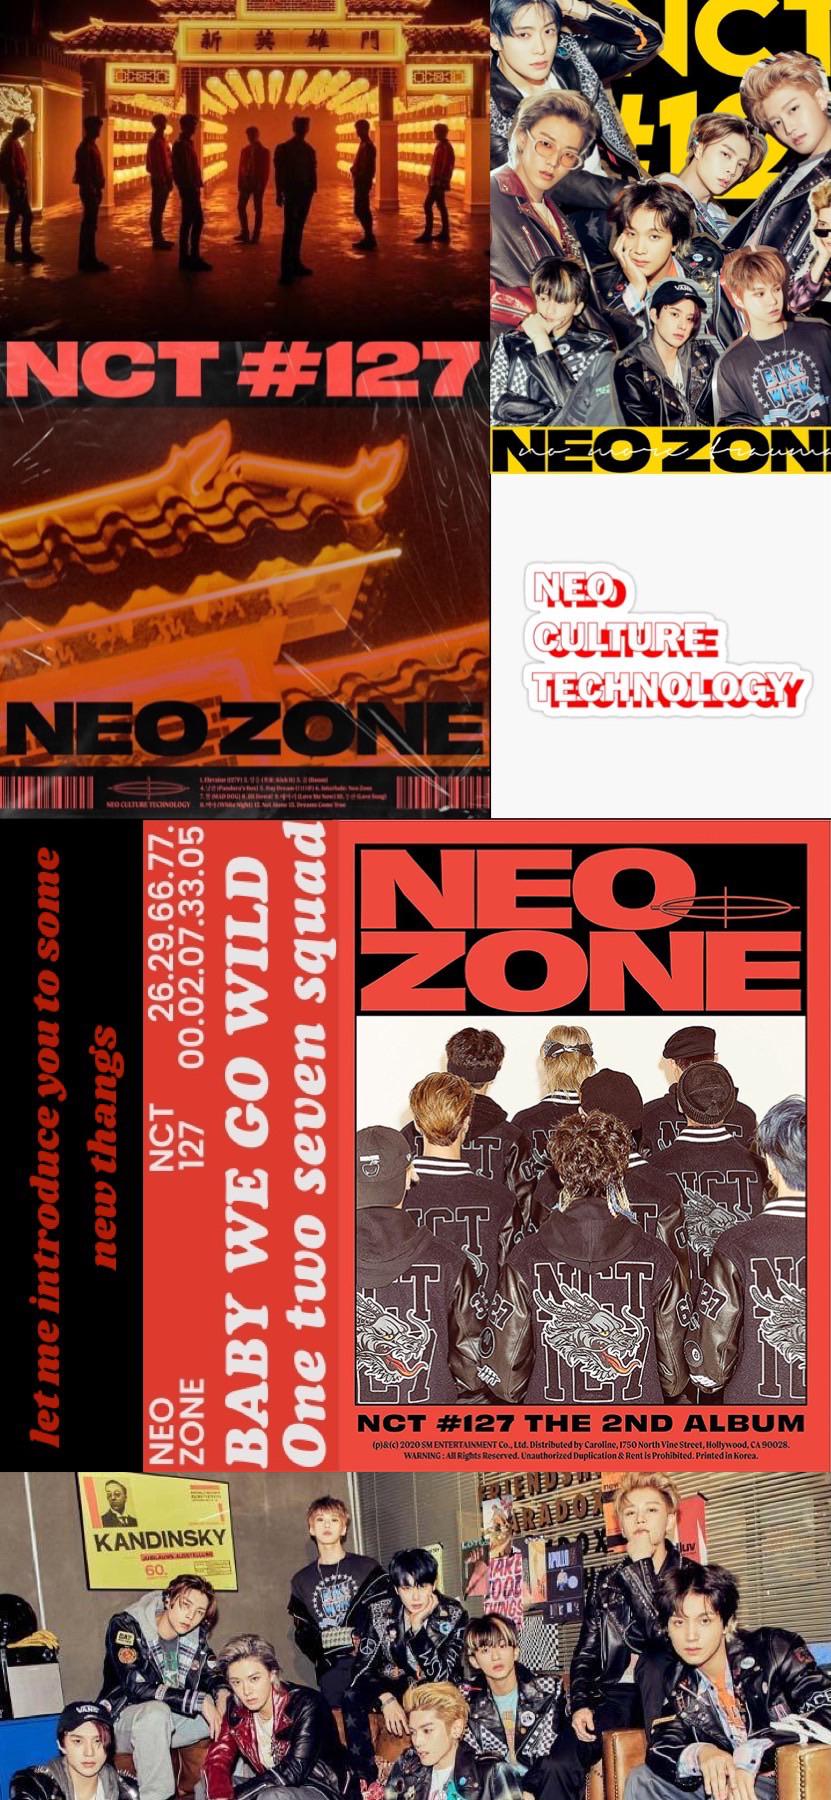 just made a neo zone inspired wallpaper!! what do you think?: NCT